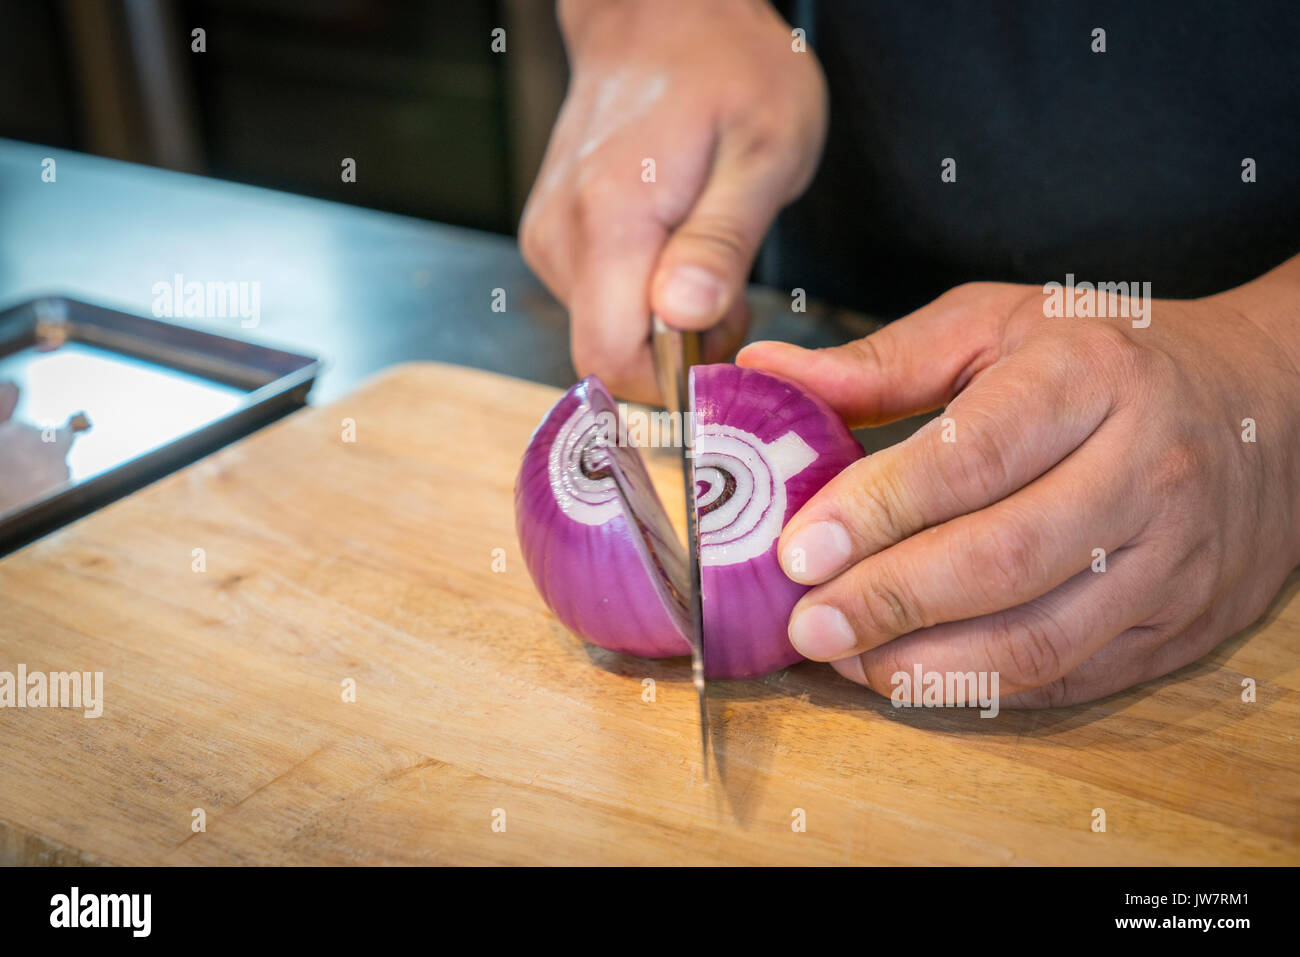 Chef chopping a red onion with a knife on the cutting board. Stock Photo